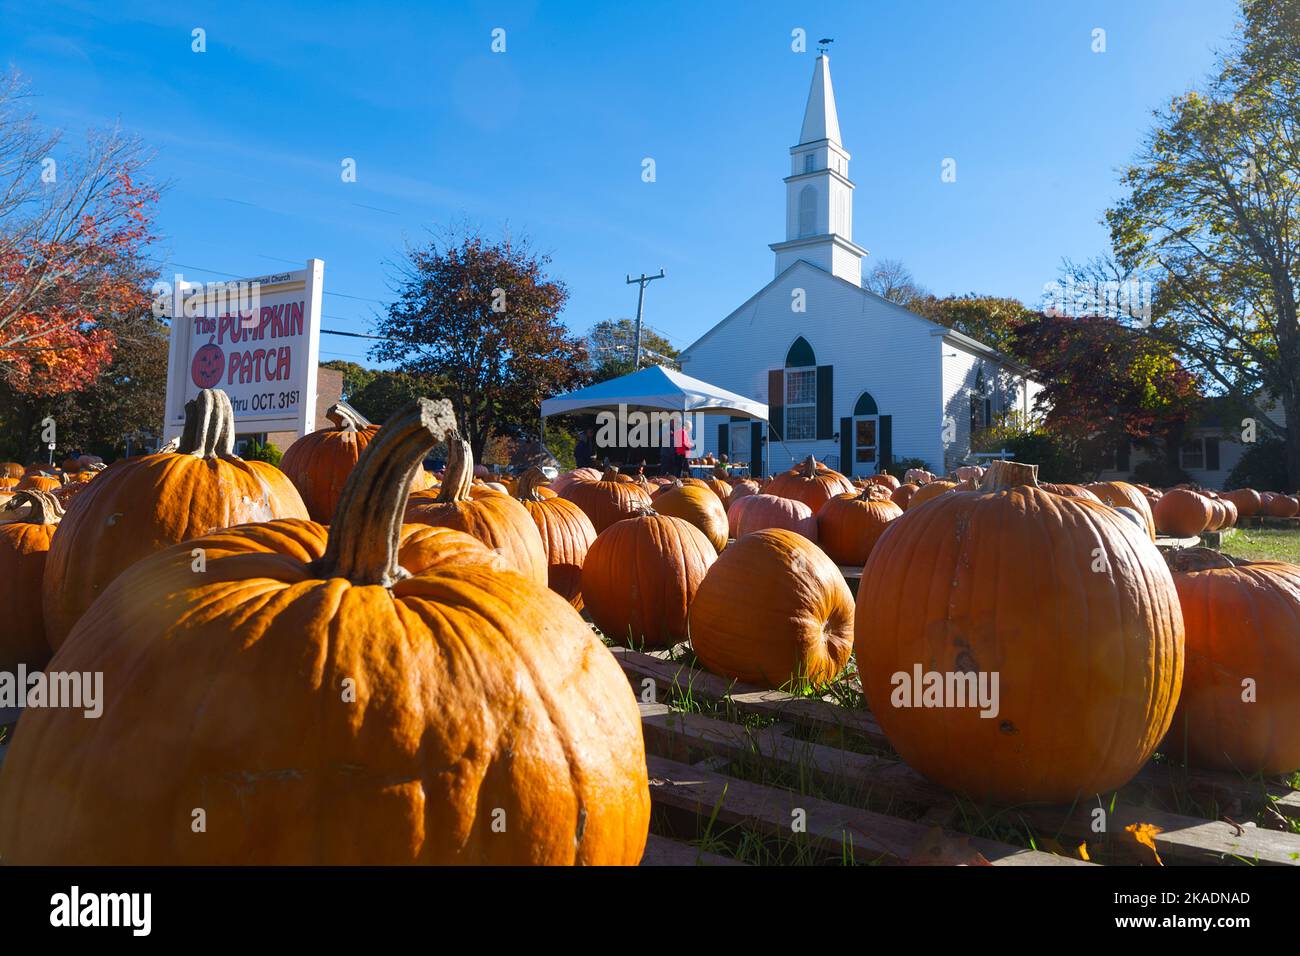 The Pumkin Patch - Pumpkin sales fundraiser at the West Yarmouth Congregational Church.  Yarmouth, Massachusetts, USA on Cape Cod Stock Photo